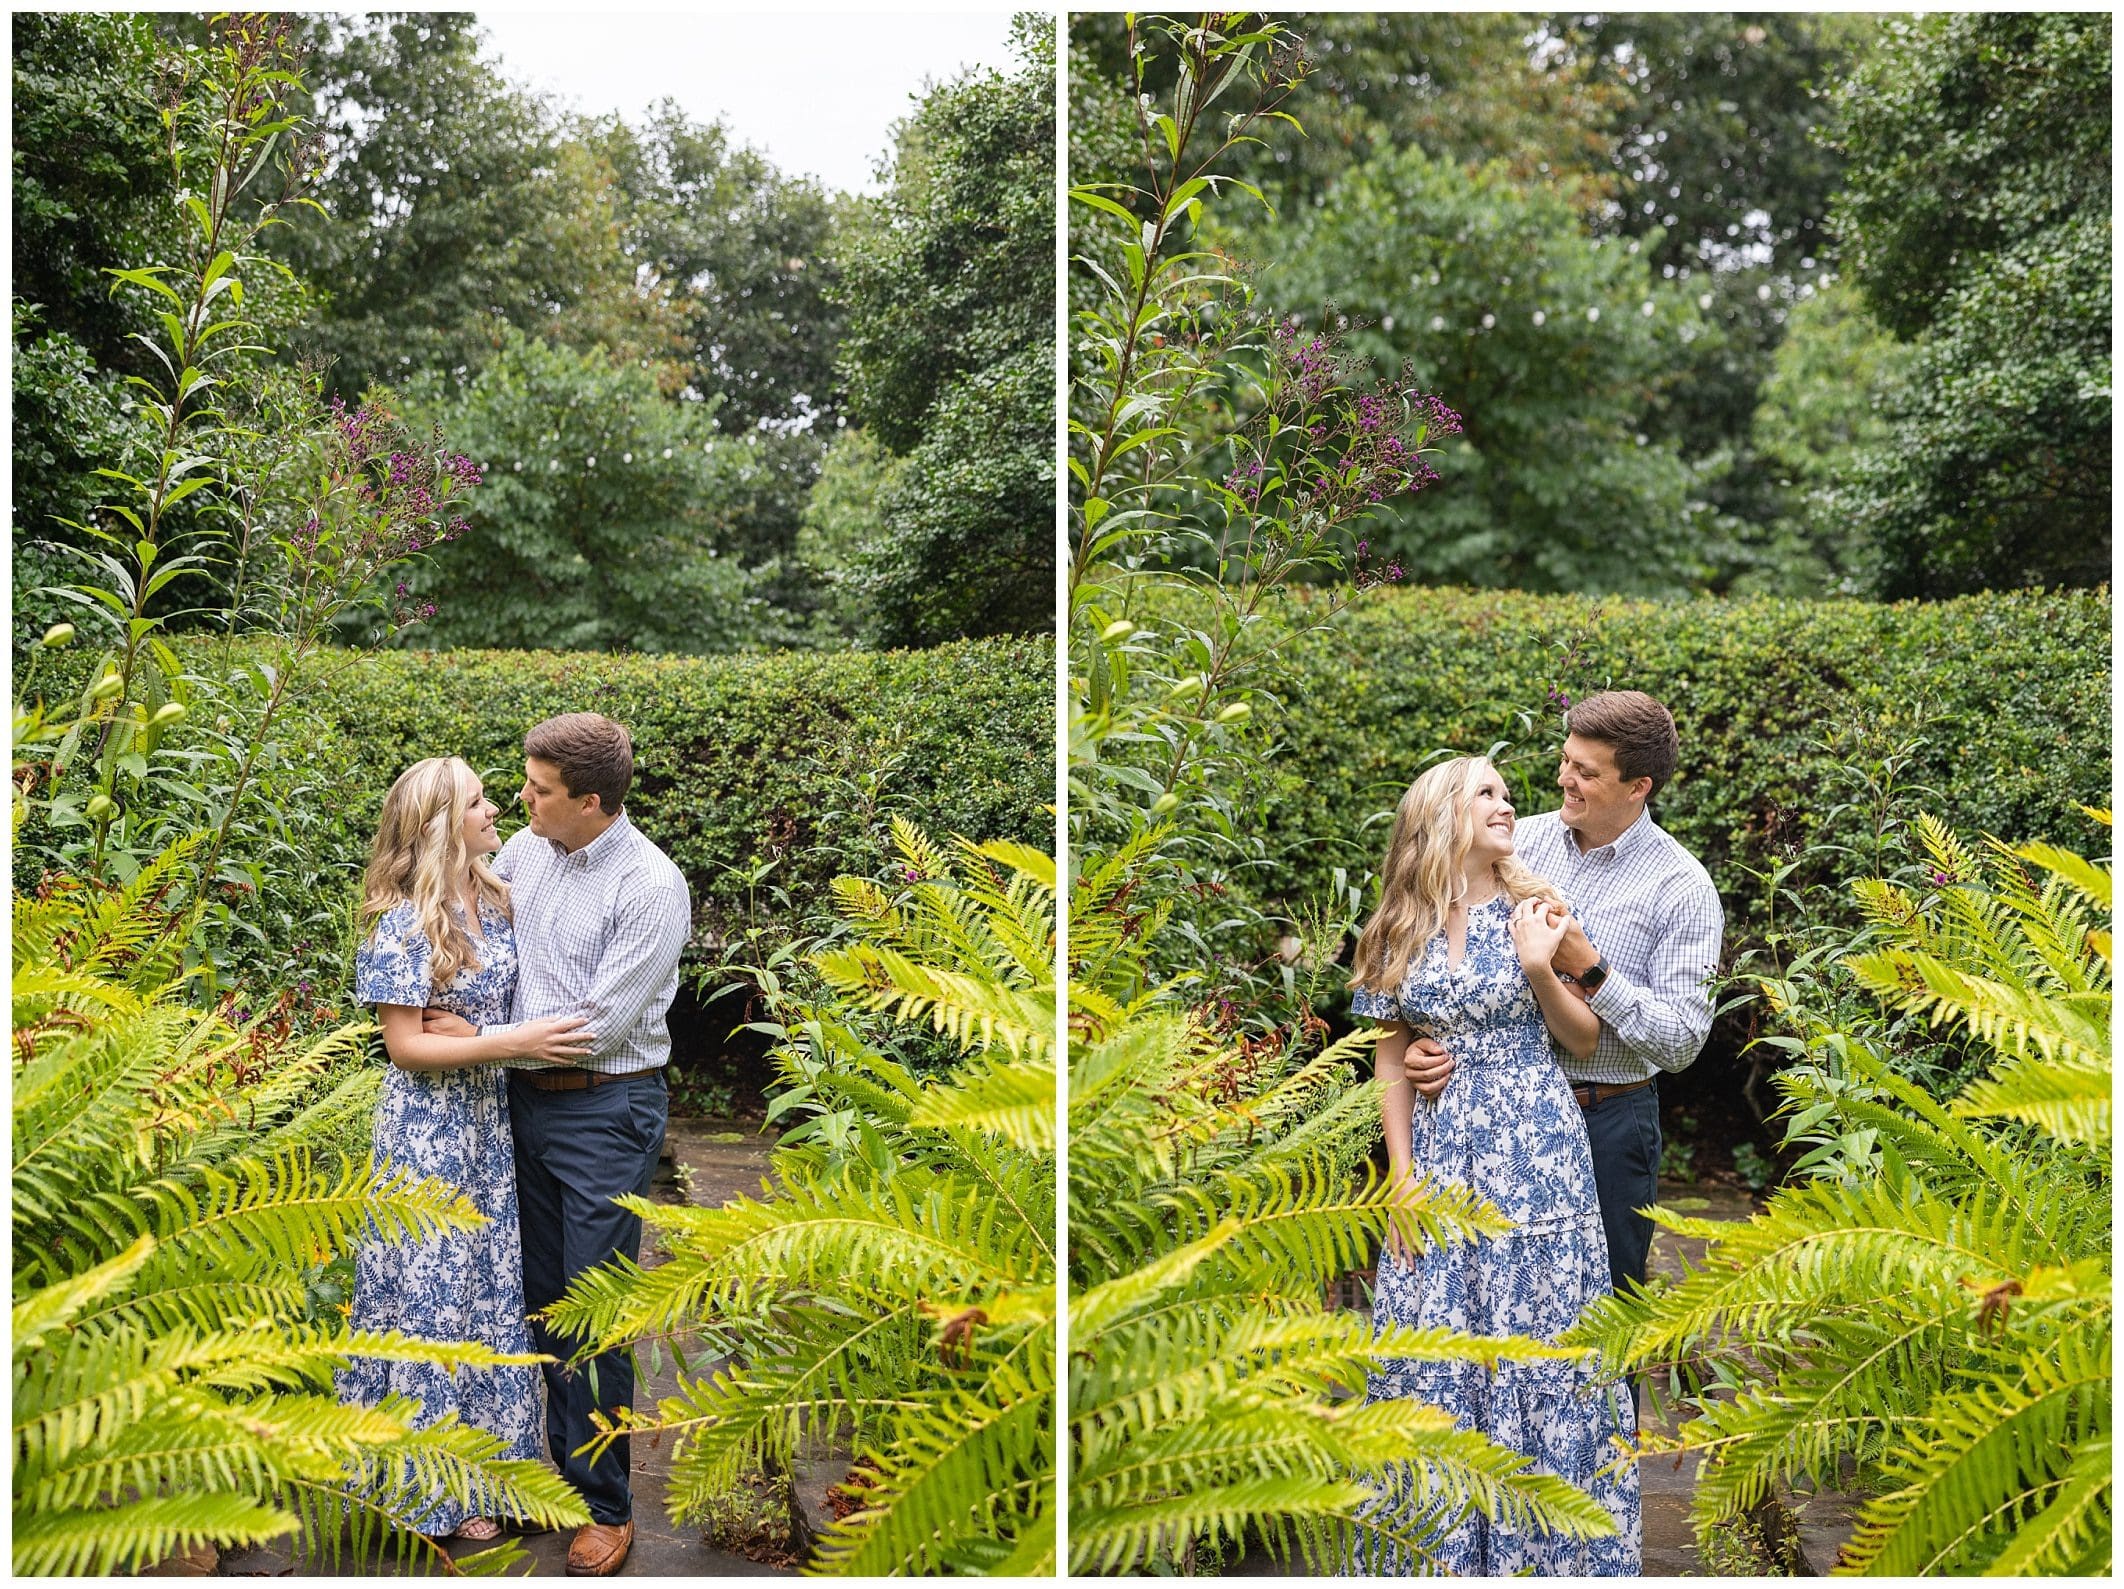 Girl in blue and white anthropology dress  snuggled up with fiance surrounded by greenery at their engagement session at the NC Arboretum.